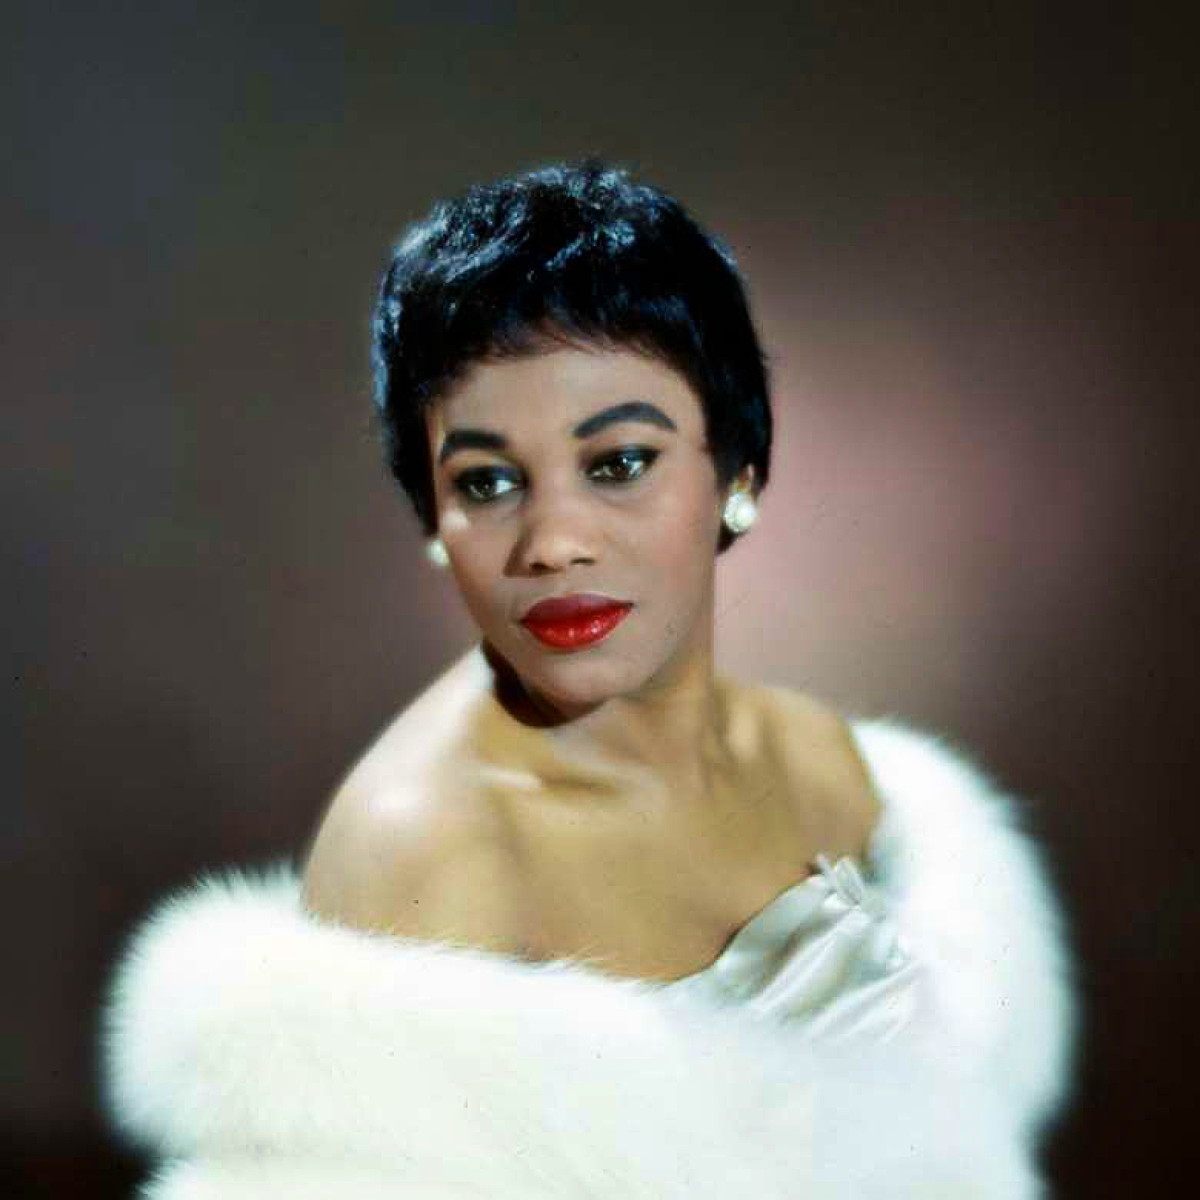 "He Shall Feed His Flock", is performed by Leontyne Price in the Firestone Christmas LP Volume 7,